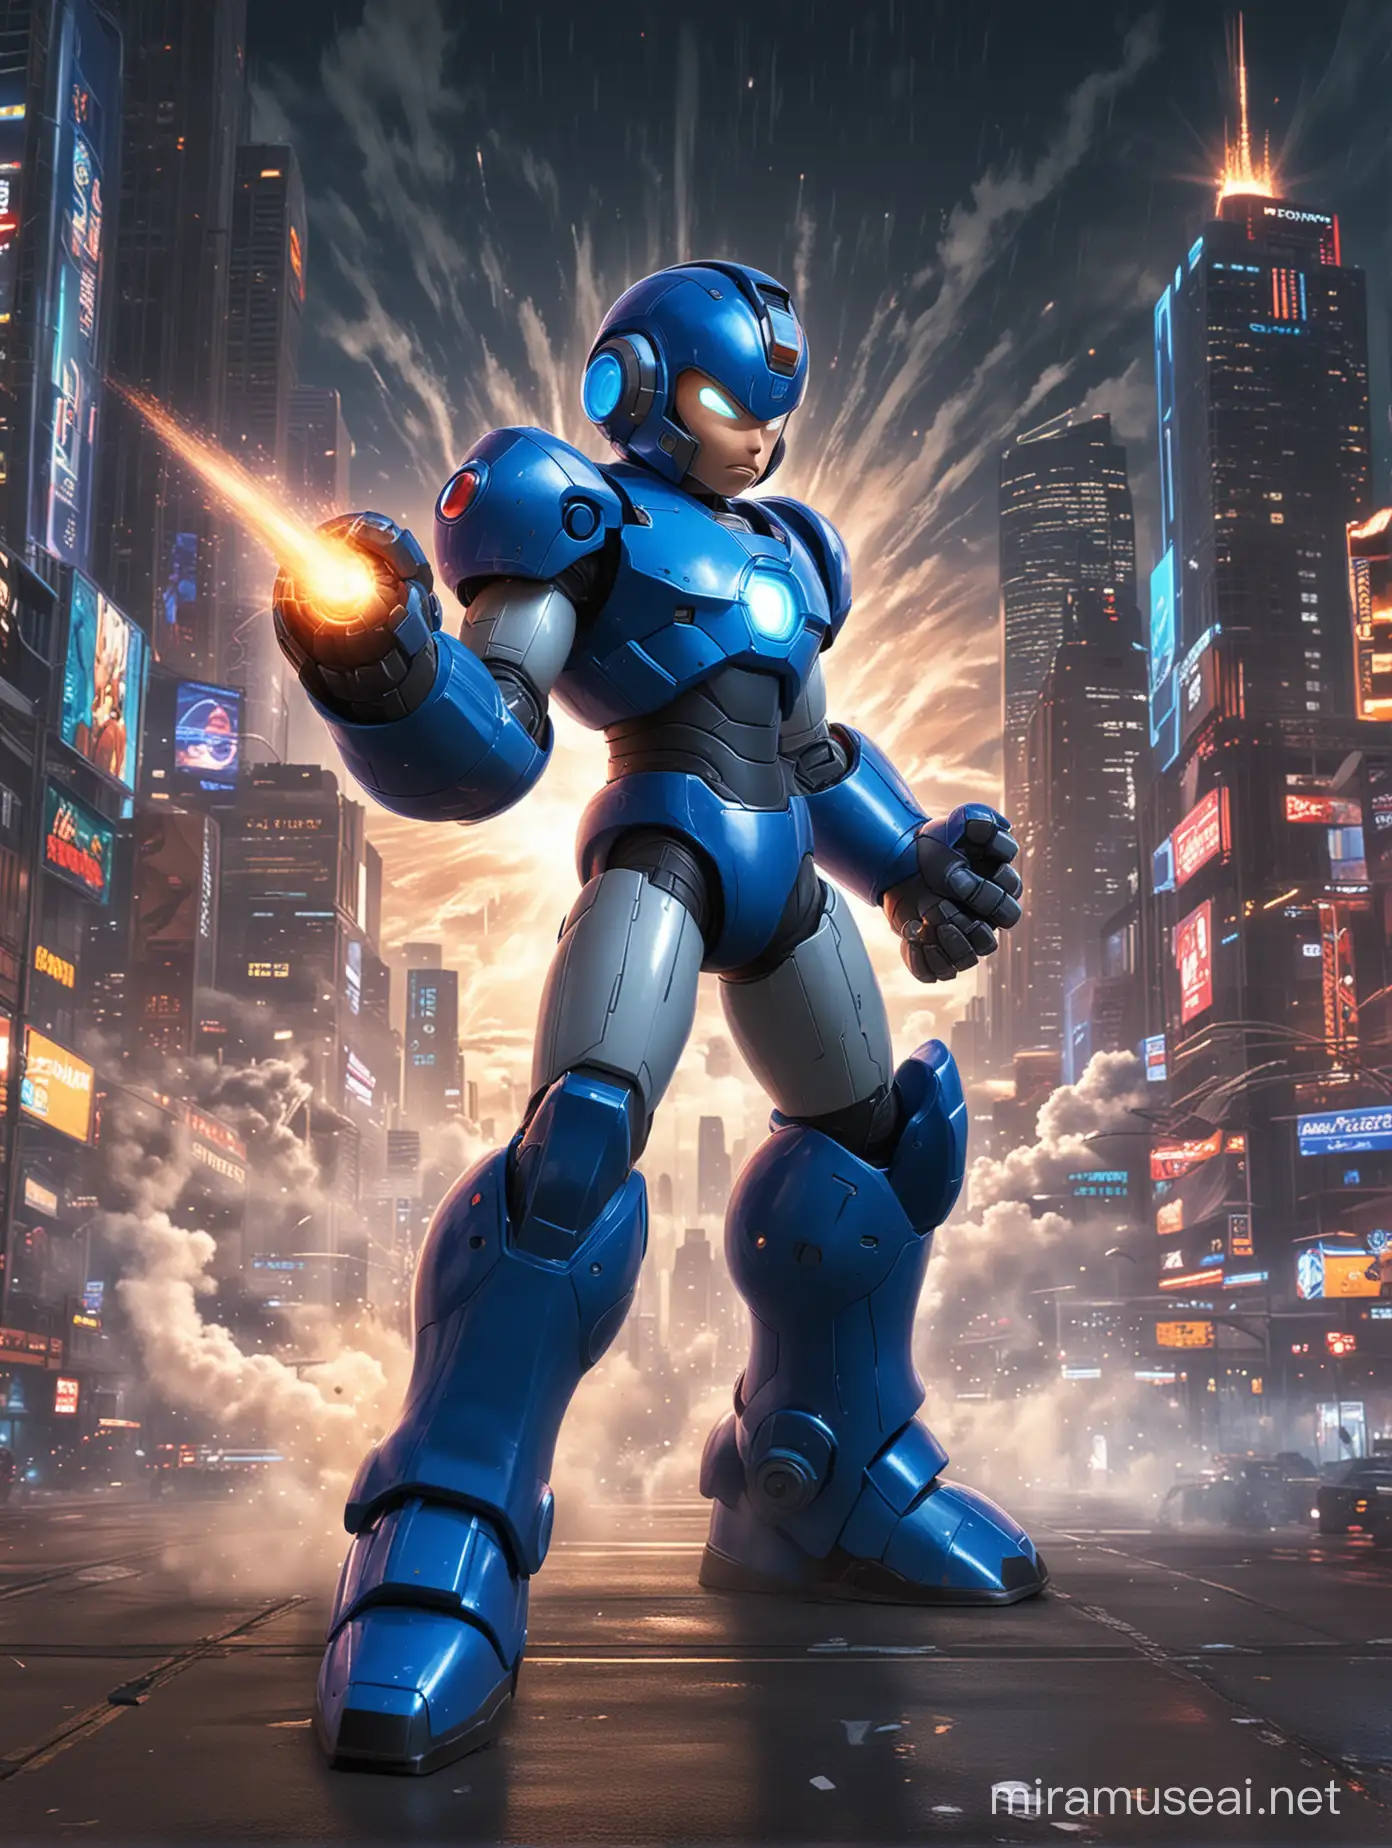 
For a hyper-realistic depiction of Mega Man shooting his blast arm into the sky, you might consider the following:

Set the scene against a backdrop of a futuristic cityscape, with sleek skyscrapers rising into the distance and neon lights illuminating the night sky. Mega Man stands prominently in the foreground, his armor gleaming in the artificial light.

Capture Mega Man in a dynamic pose, his arm cannon raised towards the heavens, with energy crackling around the barrel as he prepares to unleash a powerful blast. Focus on rendering his armor and mechanical details with meticulous attention to realism, capturing every intricate joint and panel.

Utilize lighting effects to emphasize the energy radiating from Mega Man's arm cannon, casting dramatic shadows across his figure and highlighting the intensity of the moment. Incorporate subtle details such as reflections of the city lights on his metallic surfaces to enhance the overall sense of realism.

The sky above Mega Man should be alive with energy, with streaks of light and vibrant colors emanating from the blast as it shoots upwards, adding to the dynamic and electrifying atmosphere of the scene.




